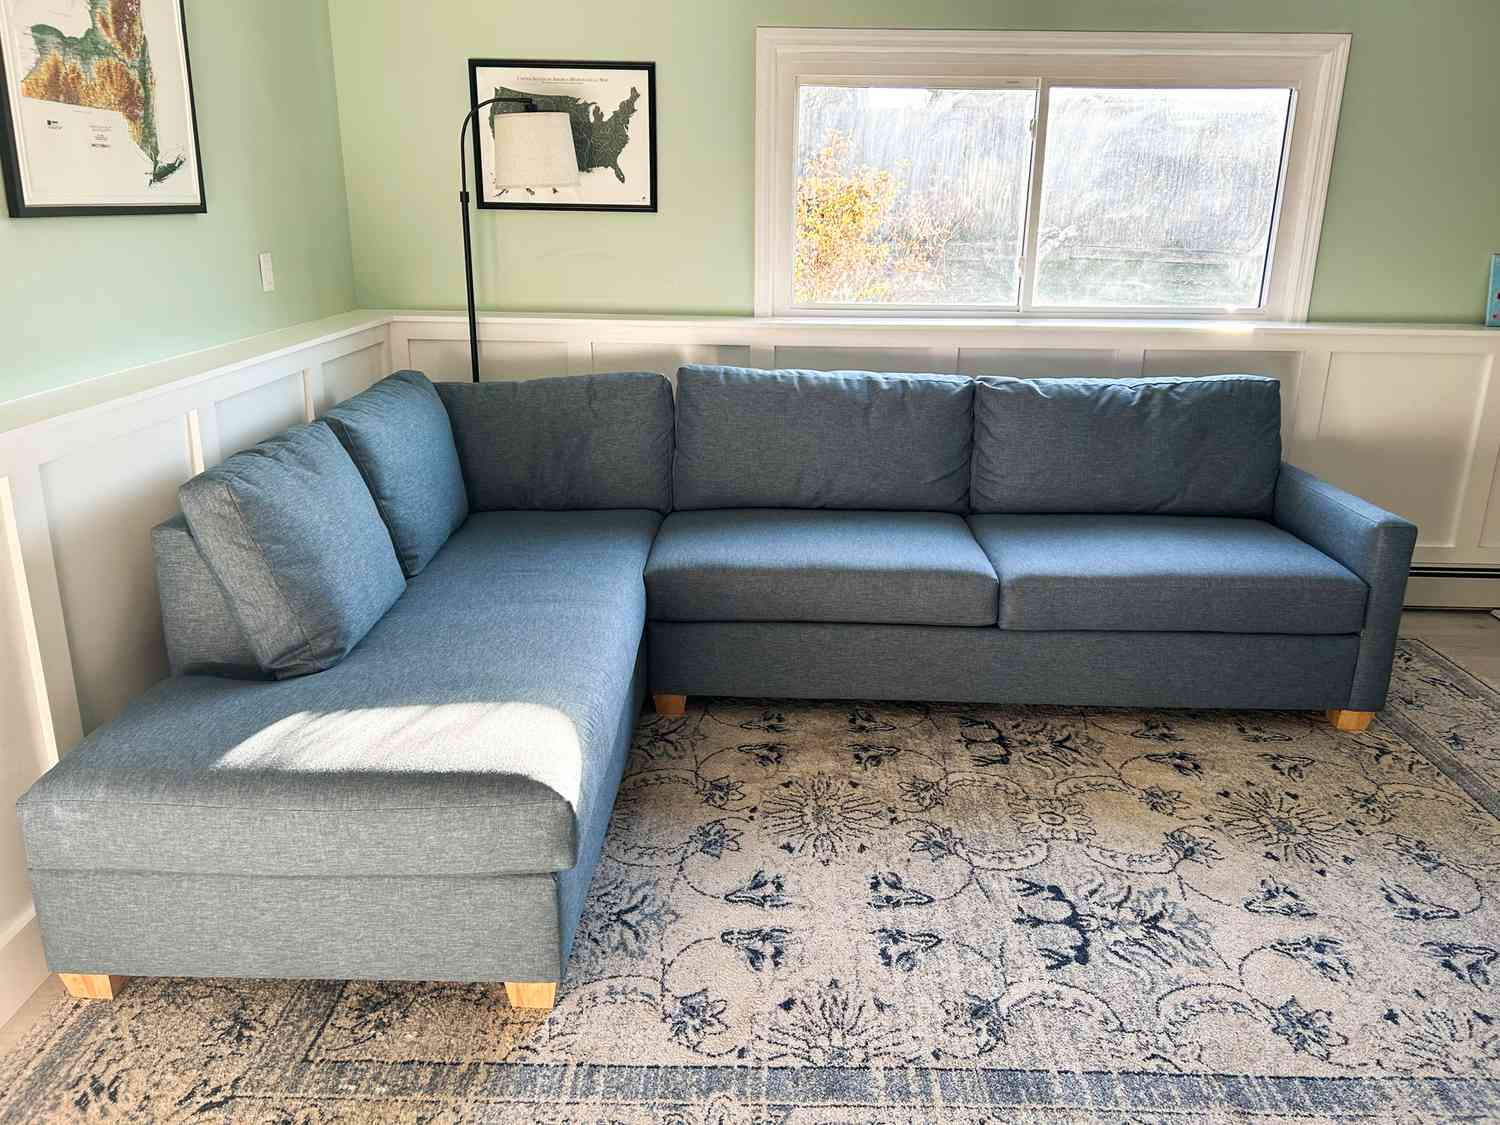 How Much Should I Pay For A Sofa